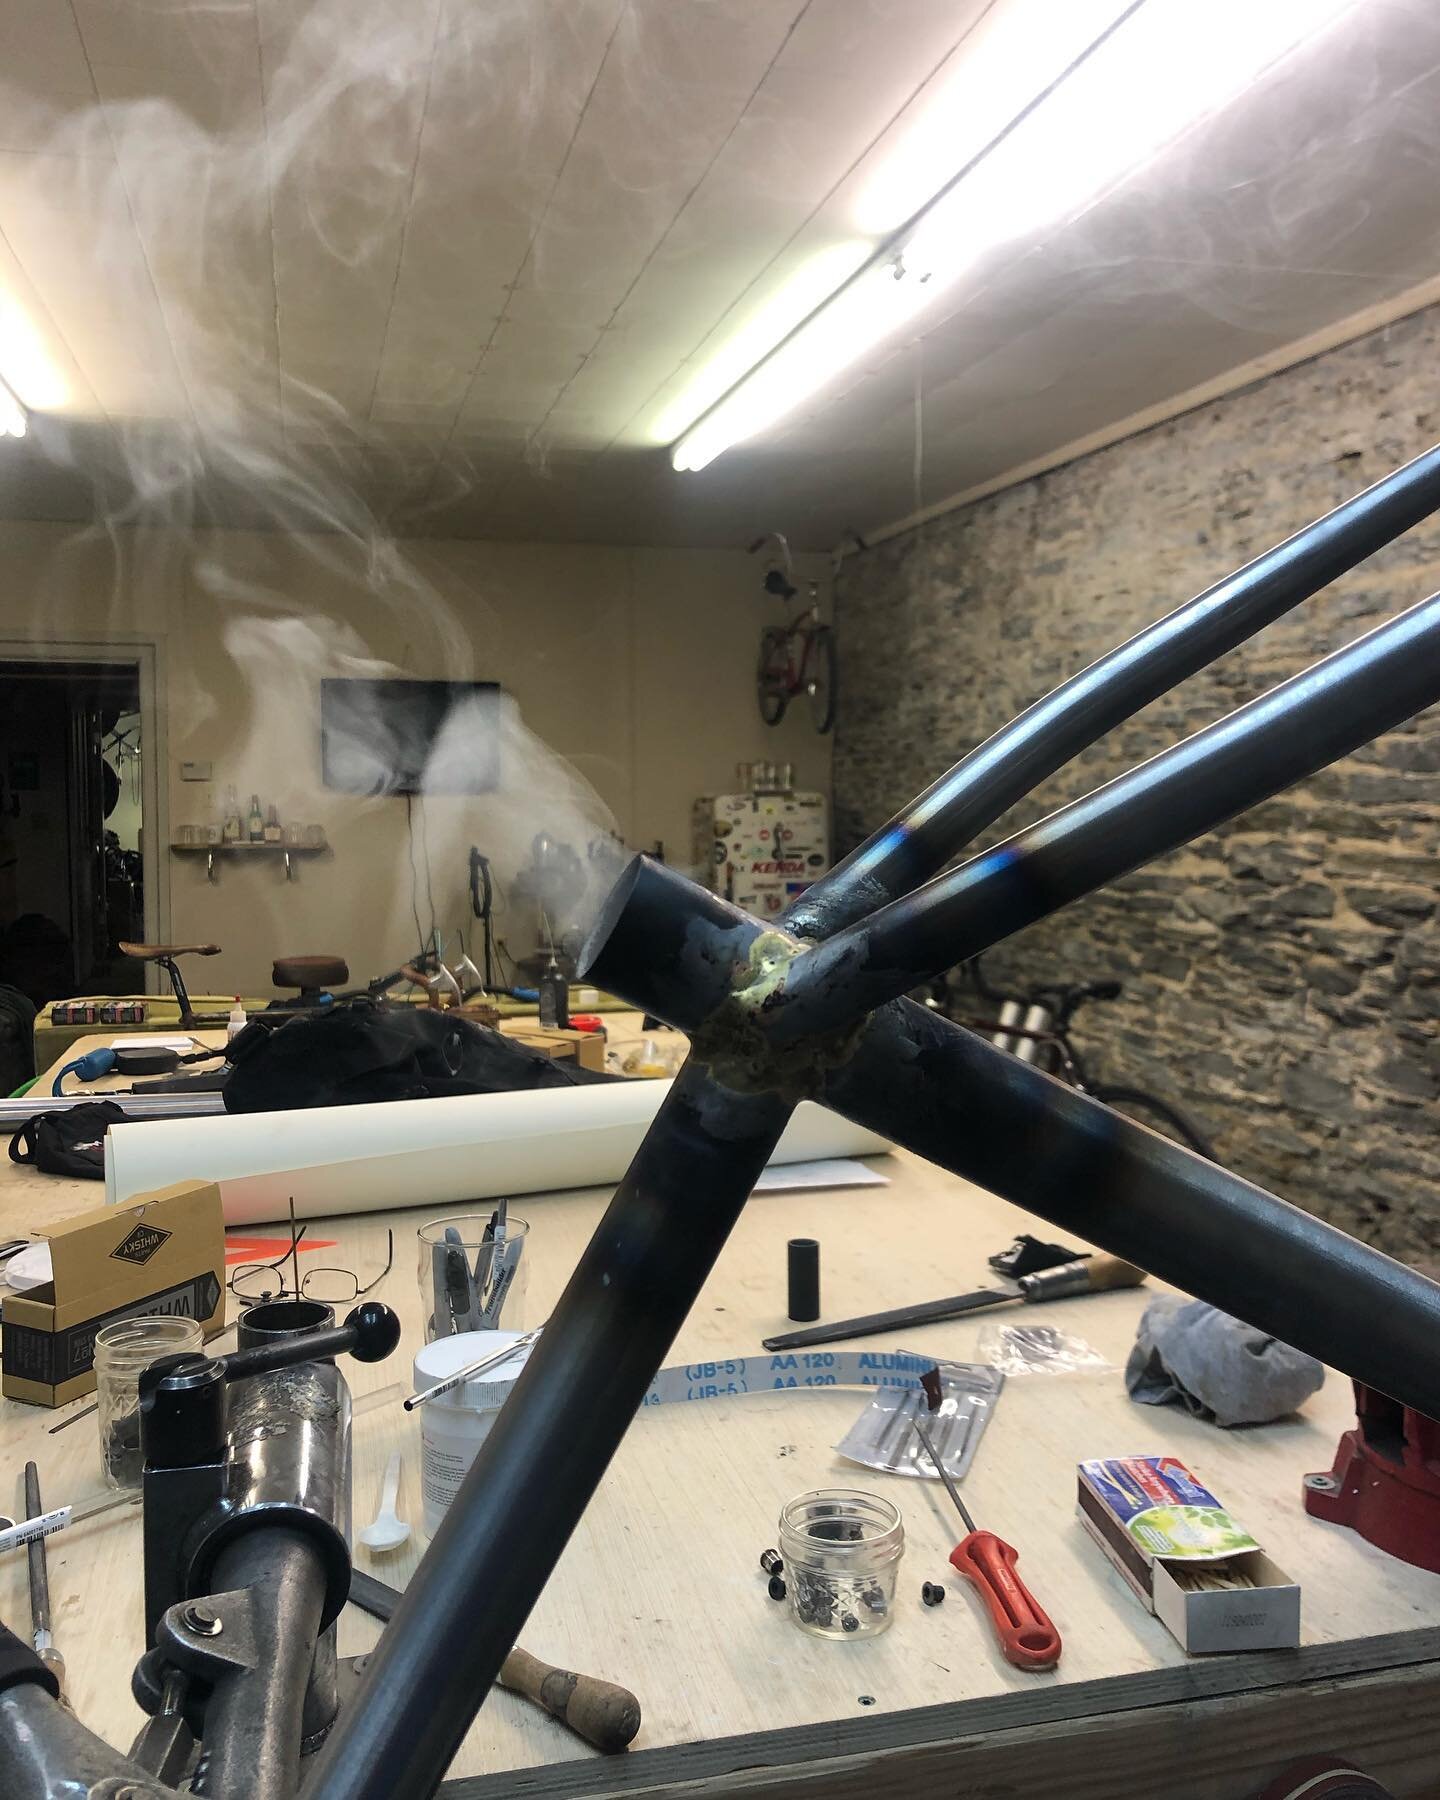 2.5 weeks this frame sat waiting for bottle bosses to be brazed in, moved forward. Severe AC separation (over the handlebars indeed) has had a very untimely setback. Sorry to this frame customer, the next few up in line waiting and to the shop custom